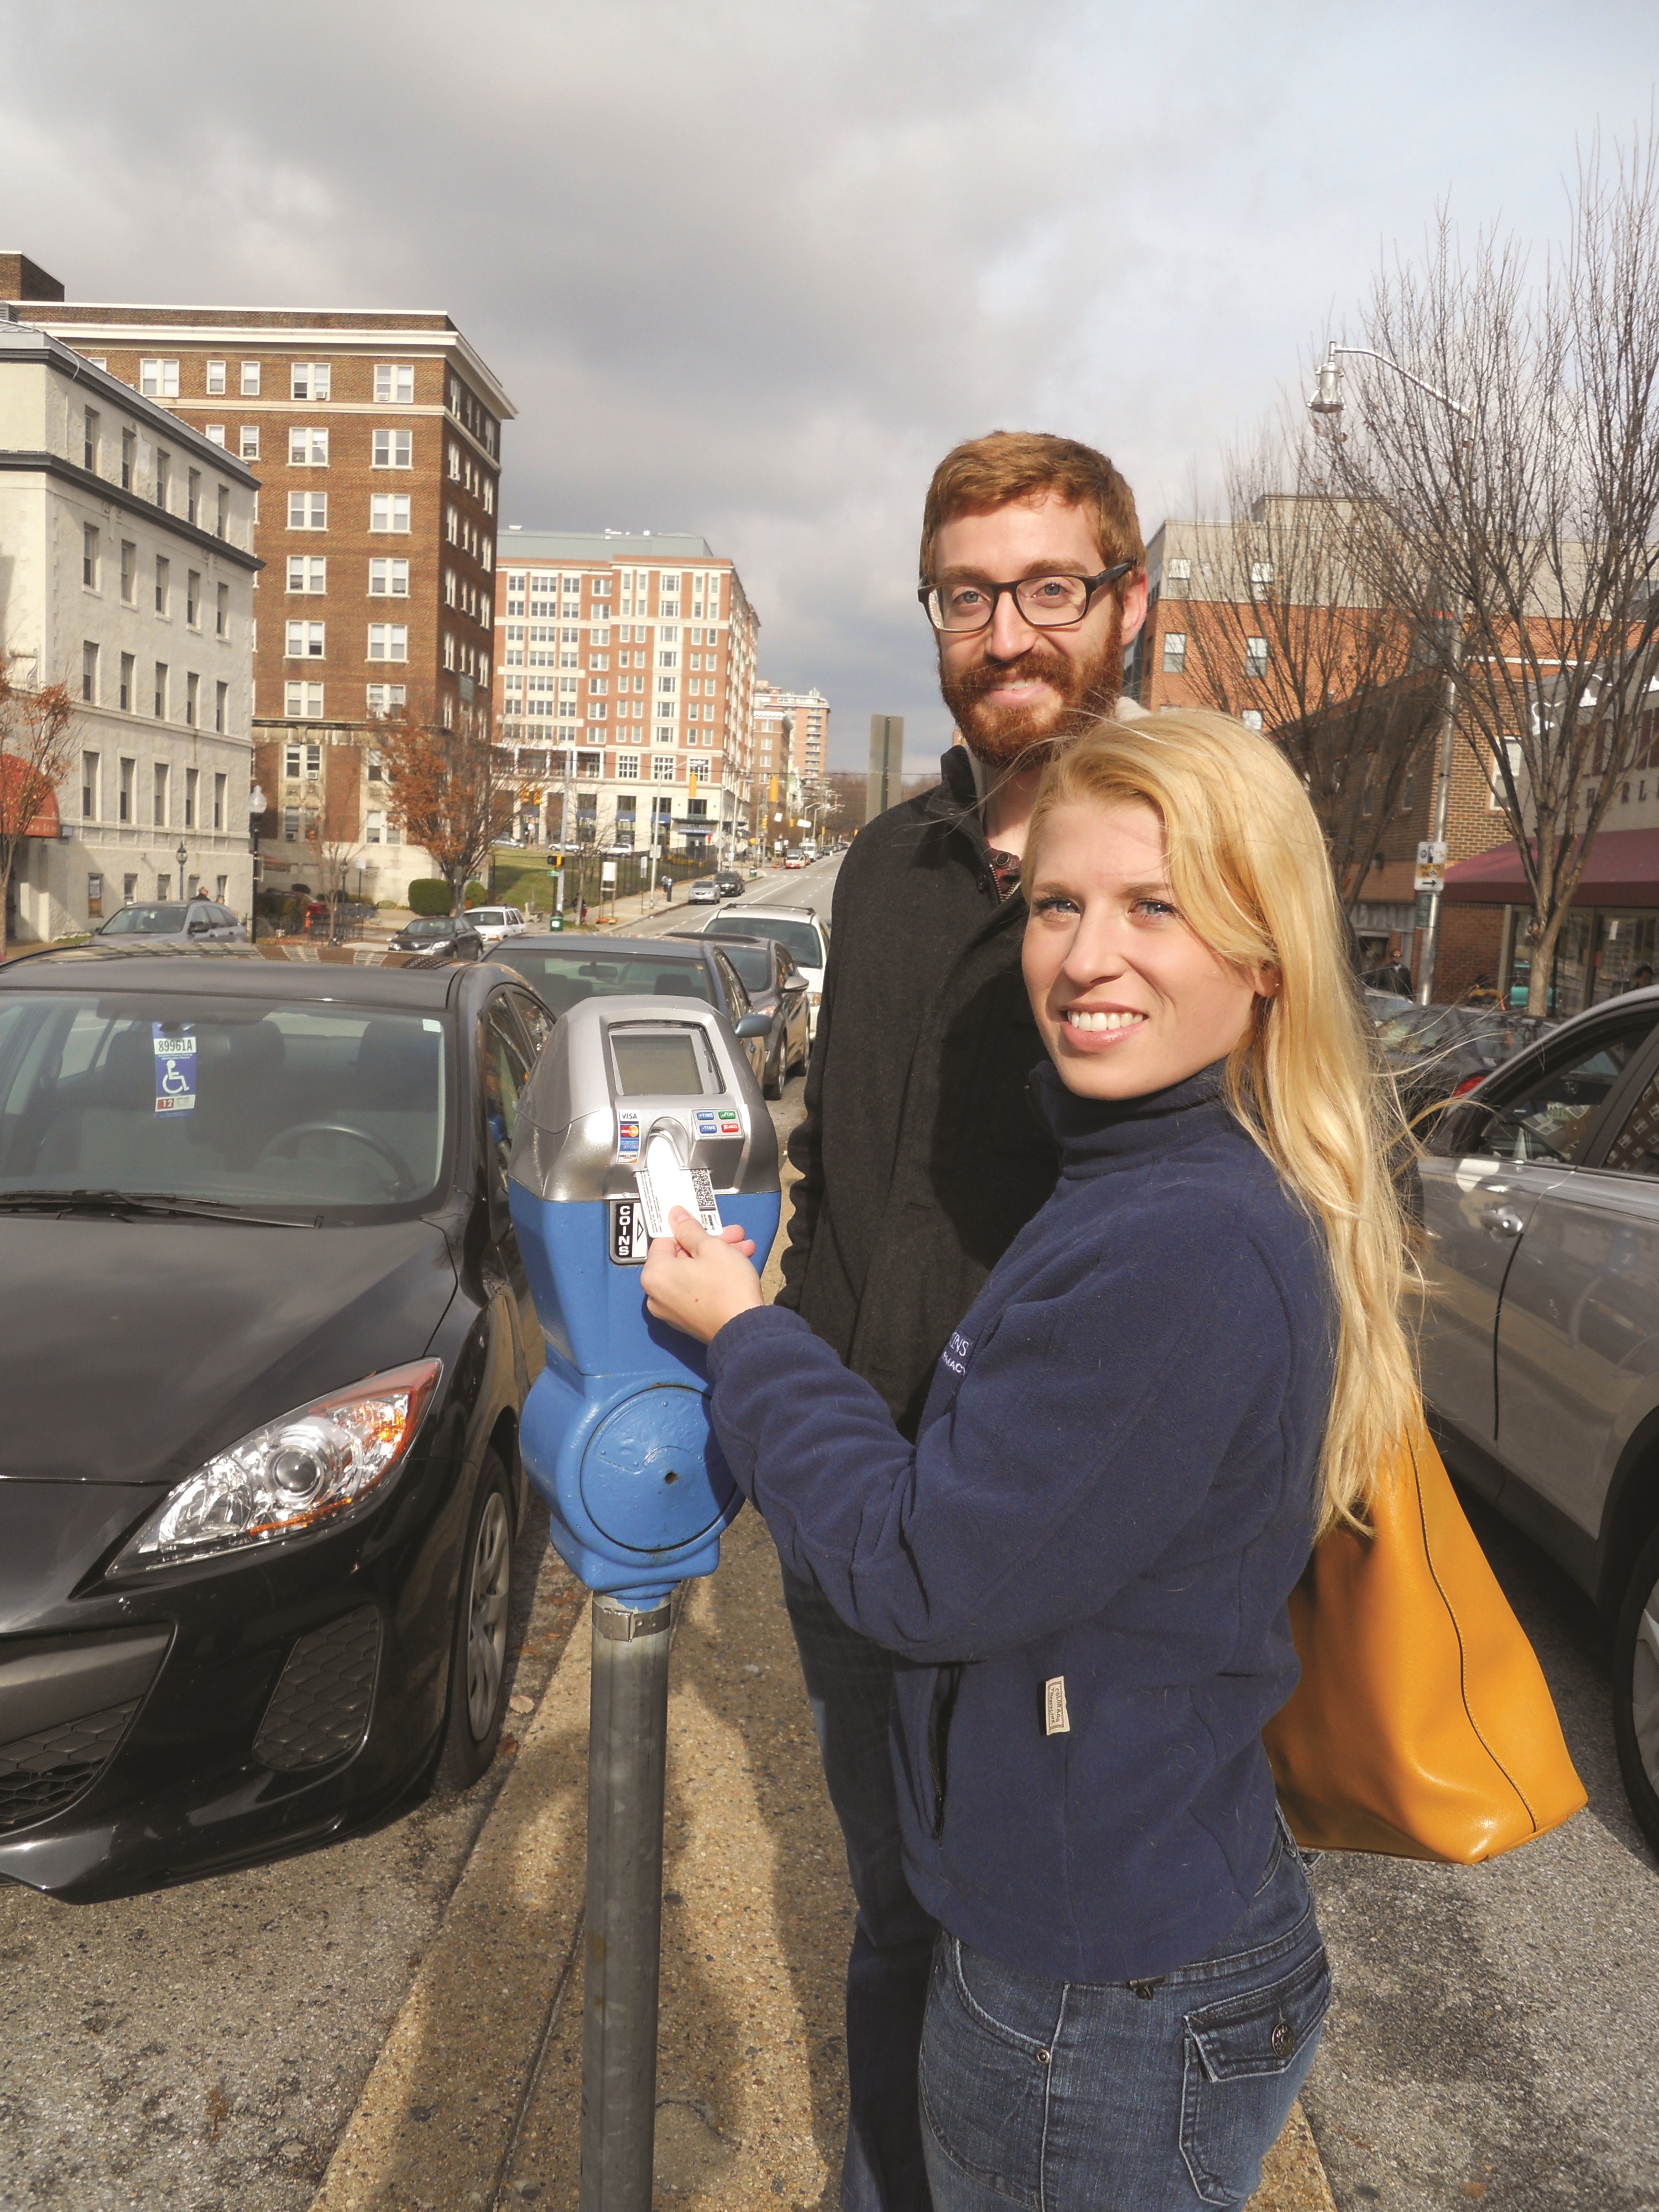 Parking Meters Help Solve Parking Problems by Creating Turnover